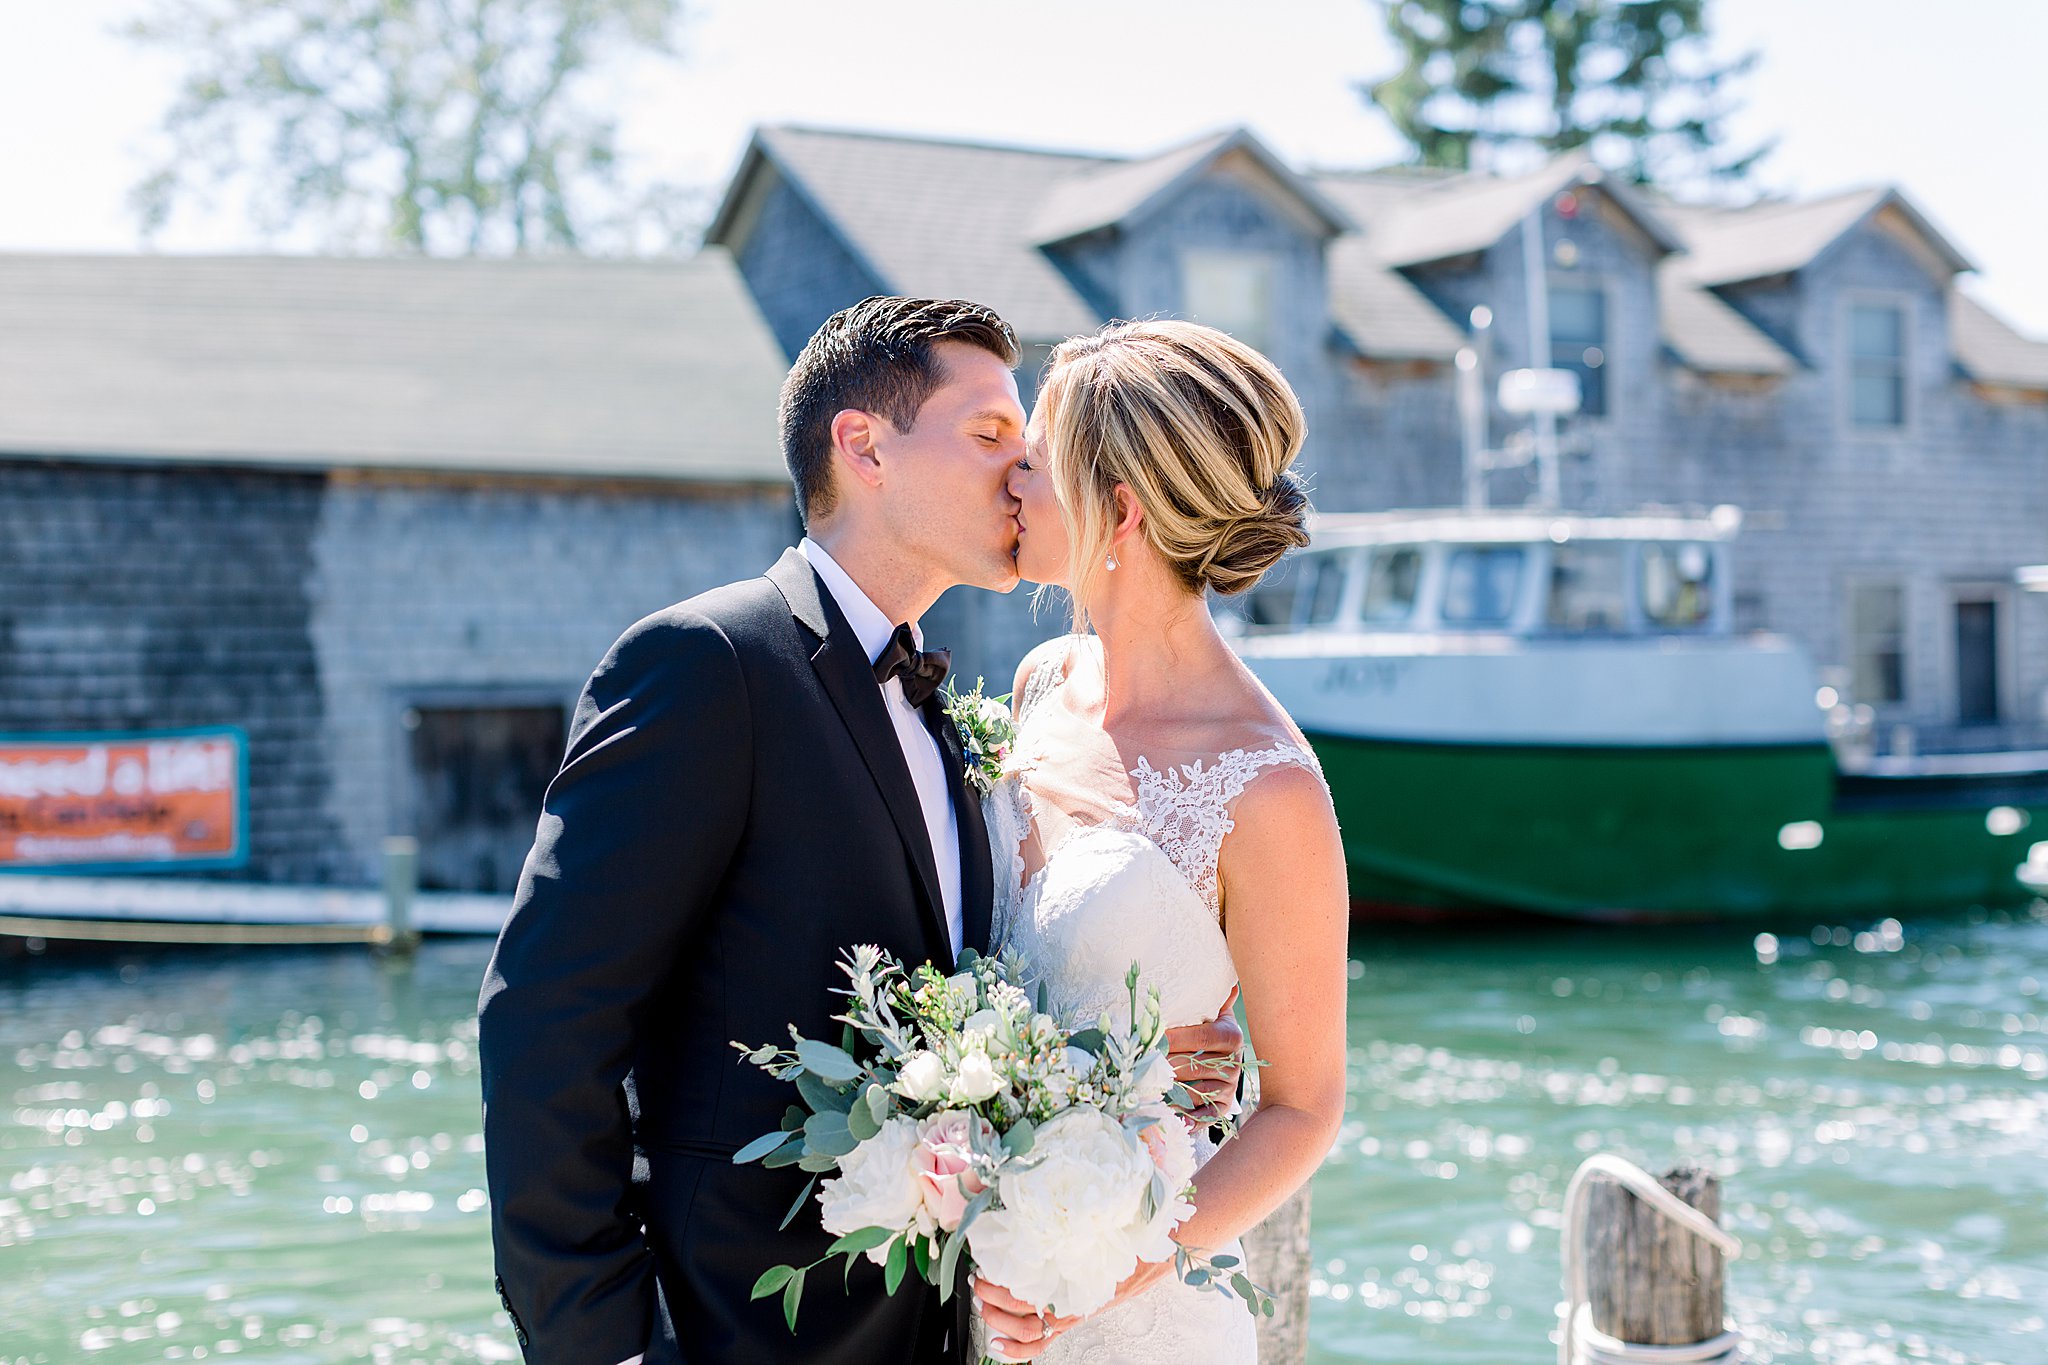 Bride and groom kiss on the docks in Fishtown in Leland during intimate Lake Michigan wedding.